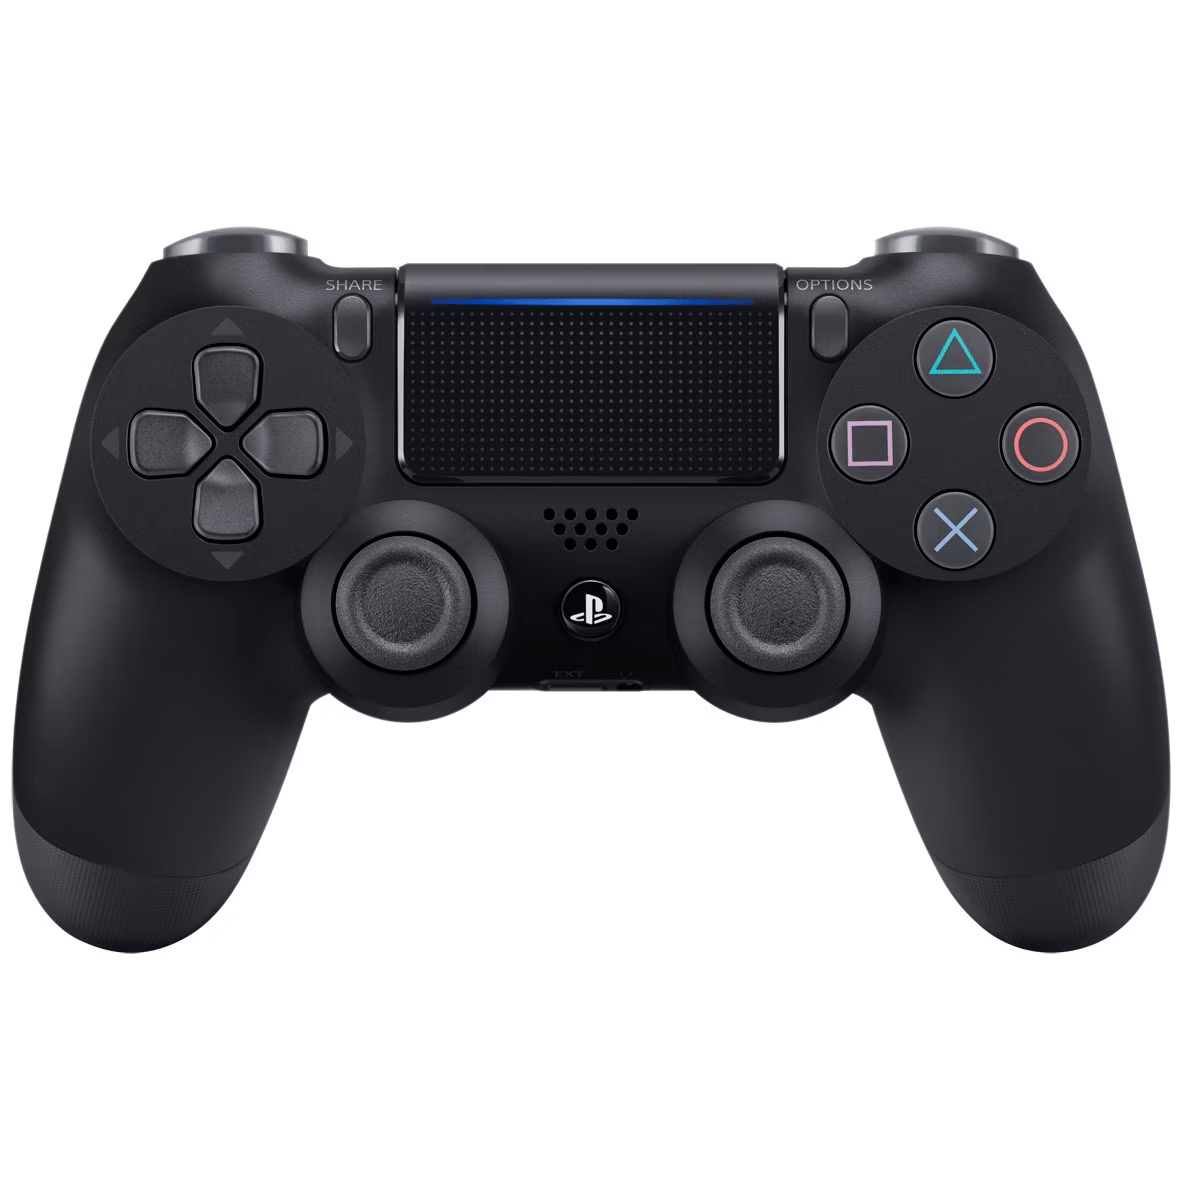 SONY PLAYSTATION 4 CONTROLLER SORT